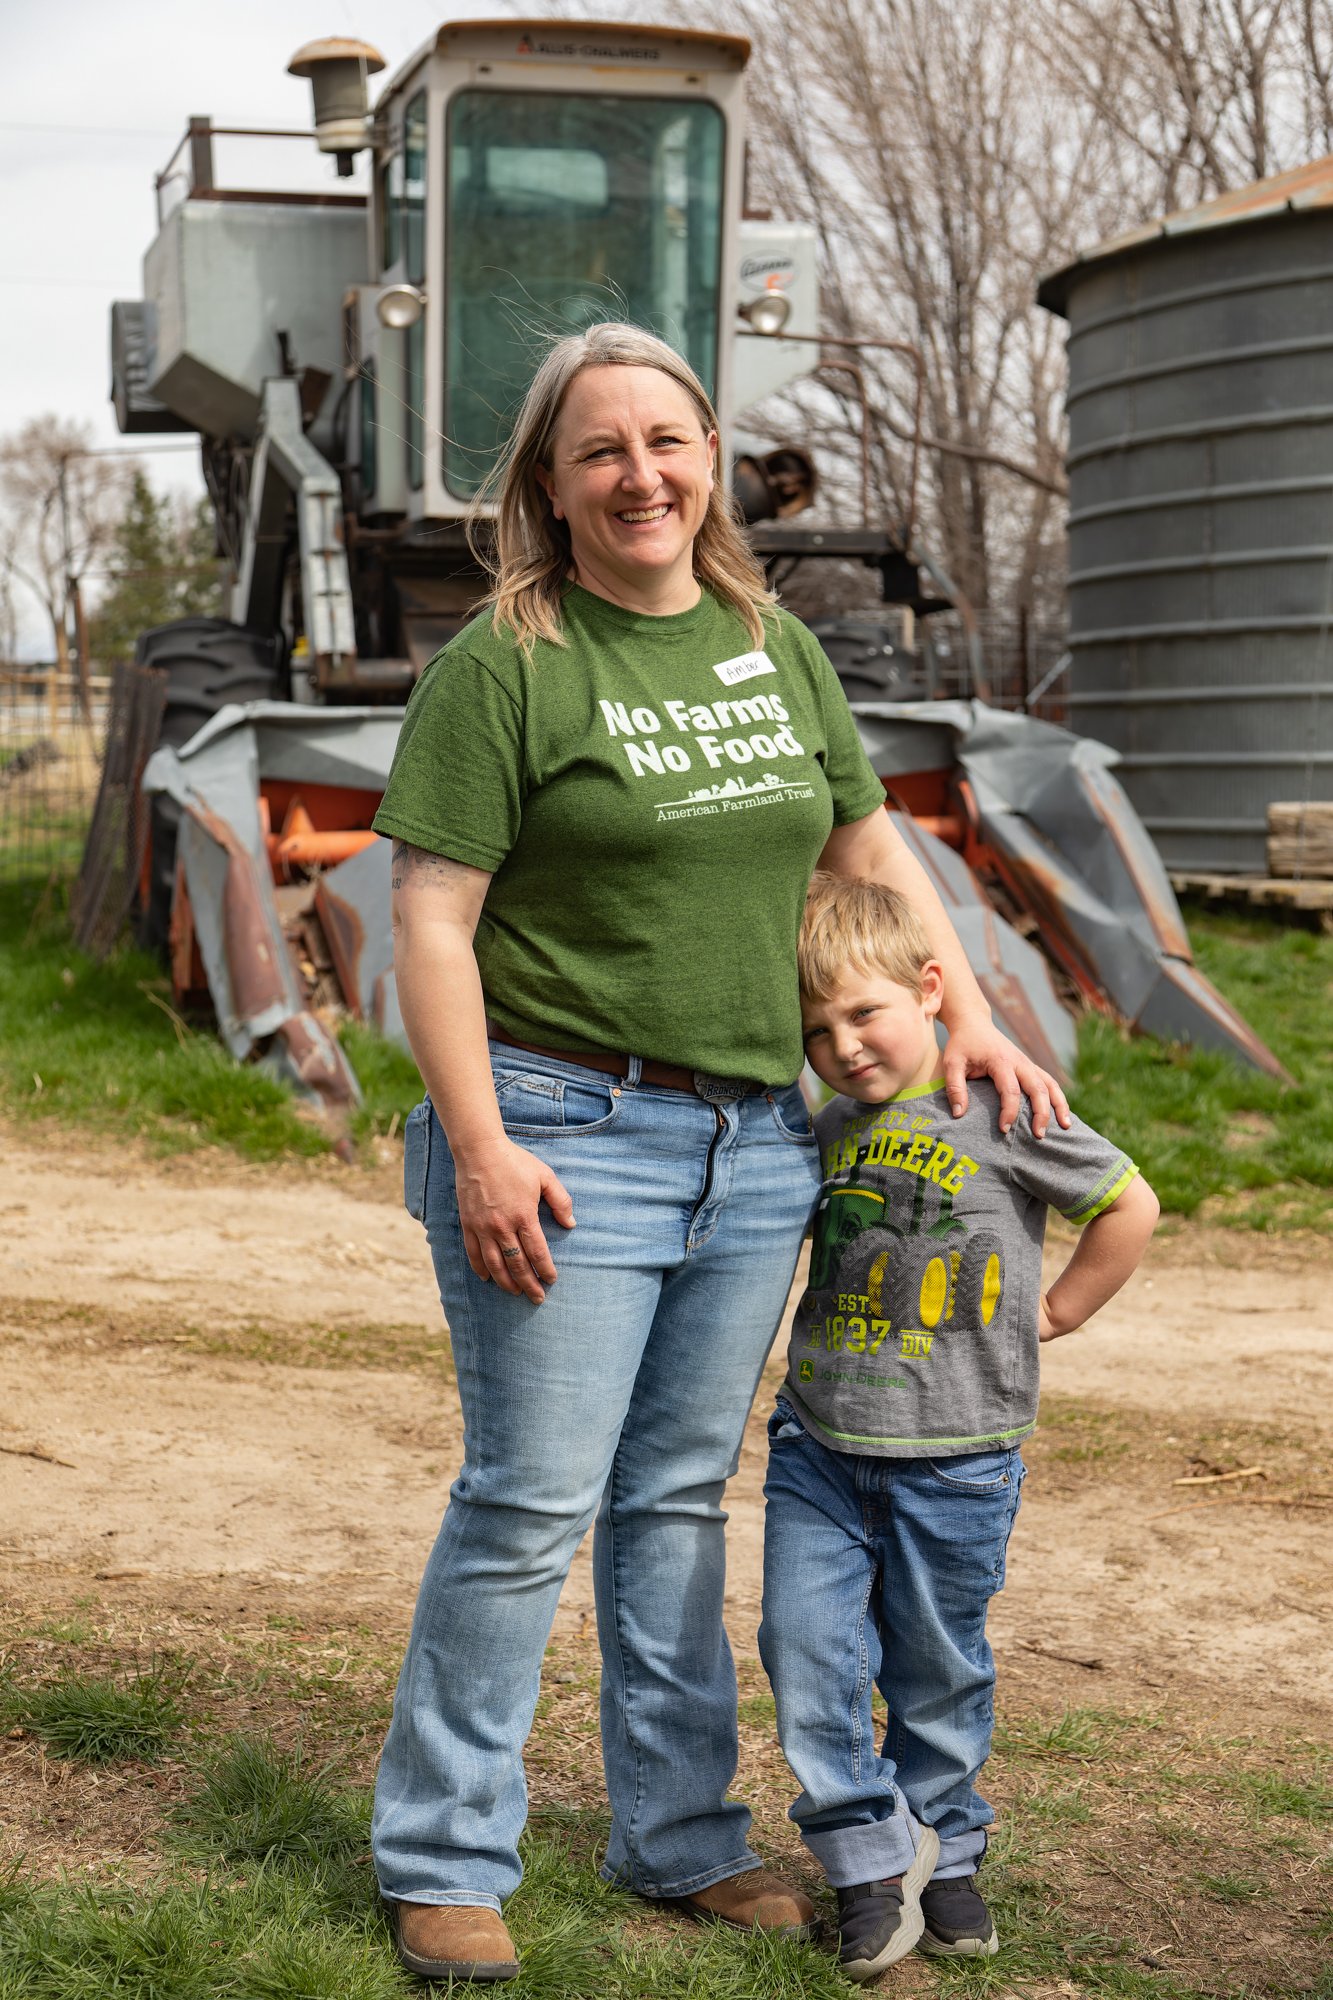 Market Director Amber BThey listened to talks by Farmer Tim Sommer, the new market director, Amber Beierle and her son.